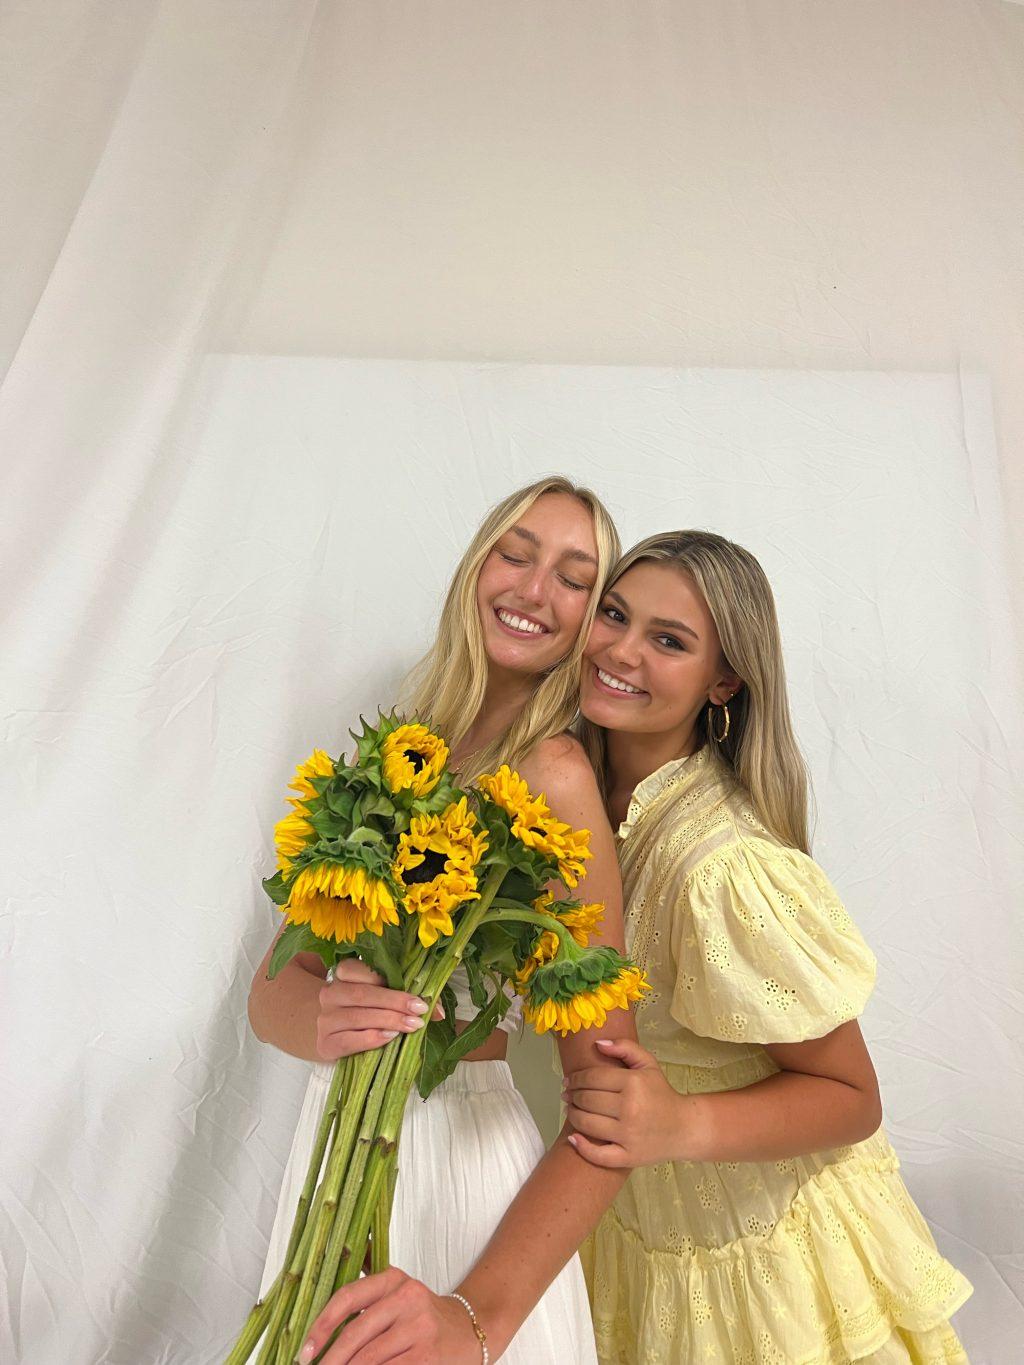 Junior Claire Everbach poses with her sorority sister, senior Olivia Hale in September 2022. Everbach is a part of the Kappa Alpha Theta sorority. Photo courtesy of Claire Everbach